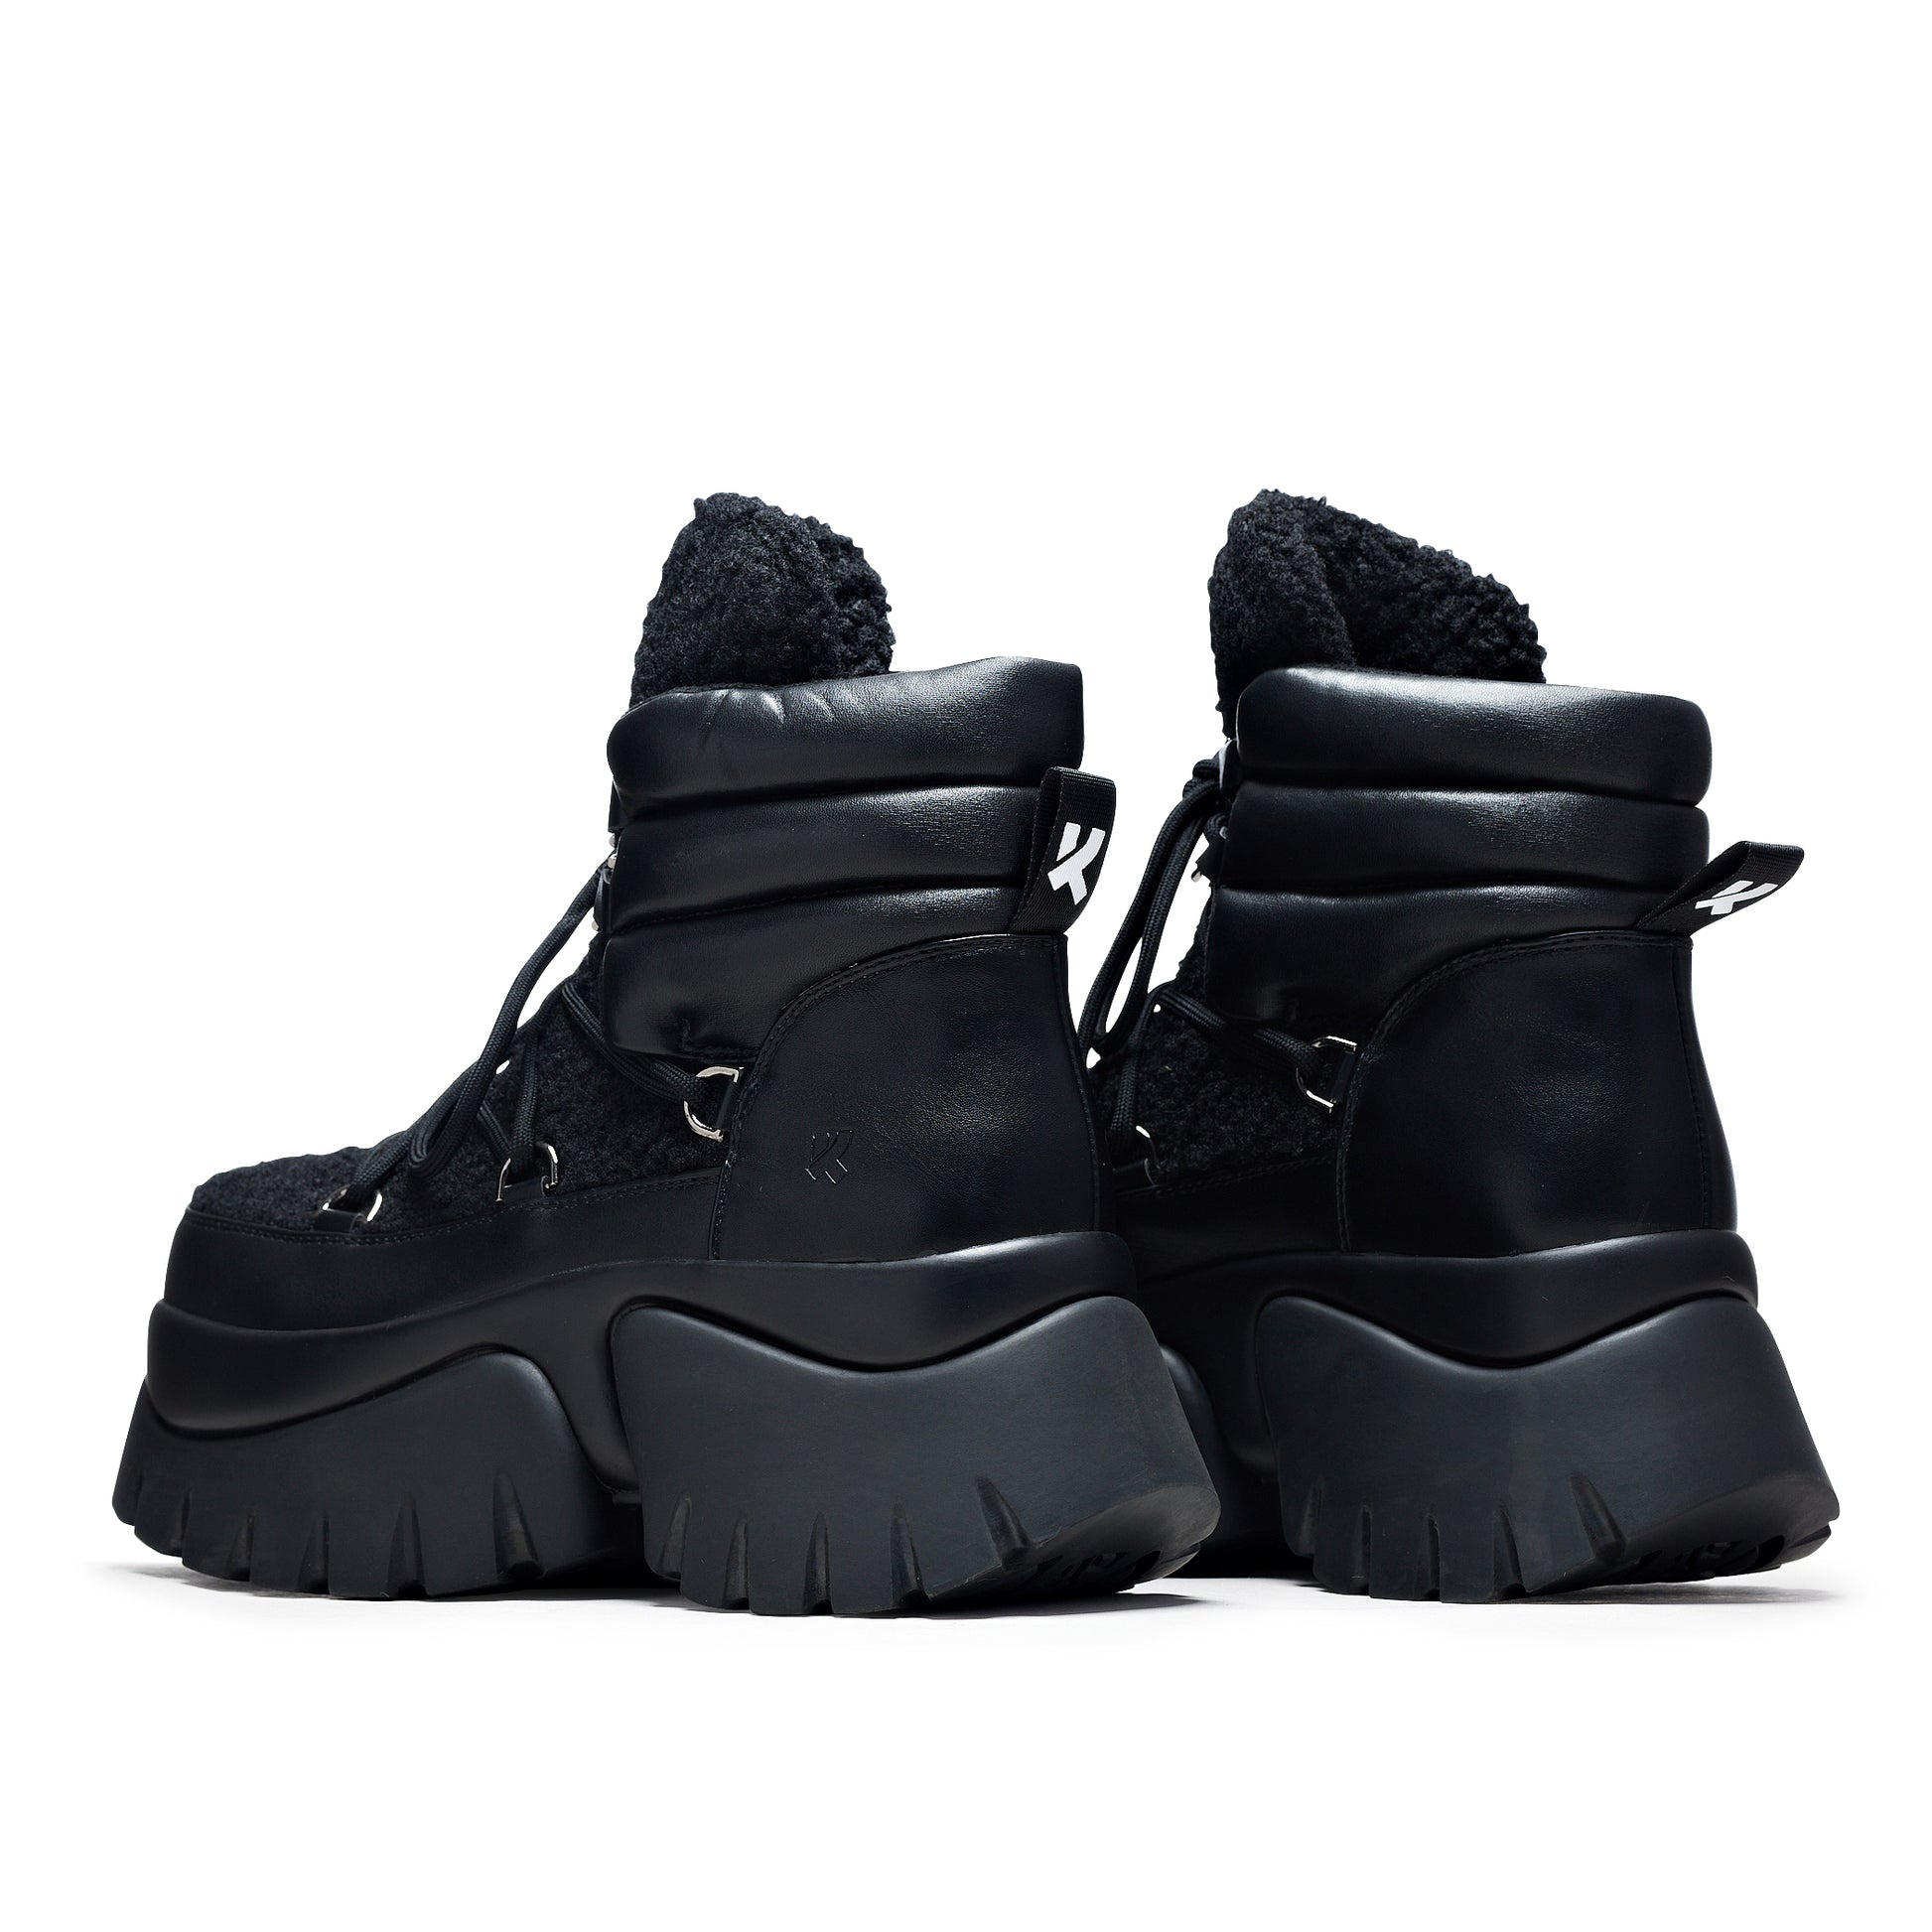 Black Fluffy Vilun Winter Boots - Ankle Boots - KOI Footwear - Black - Back View